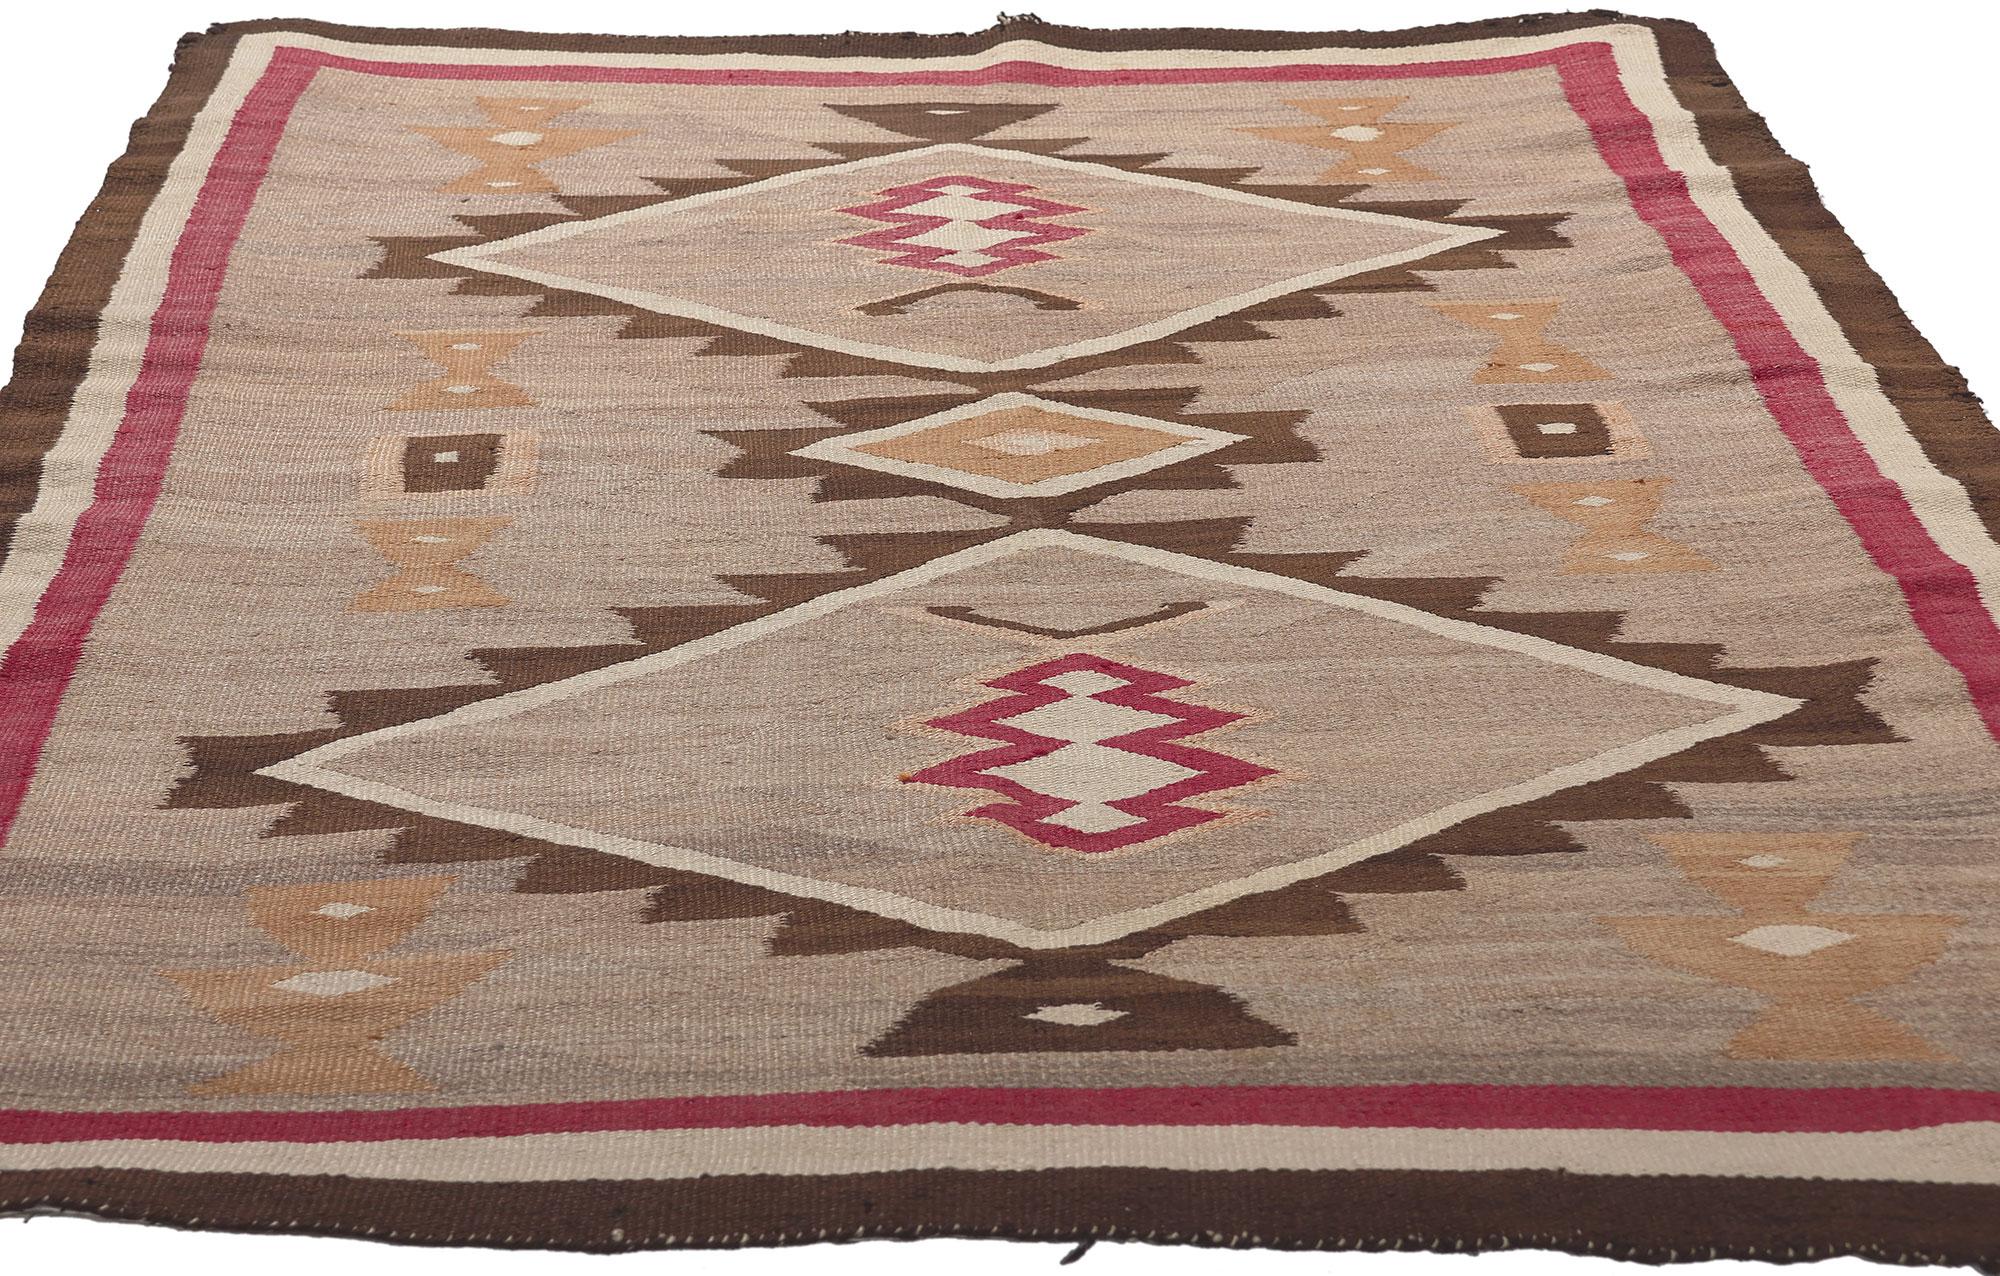 Hand-Woven Antique Crystal Navajo Rug  Southwest Style Meets Native American